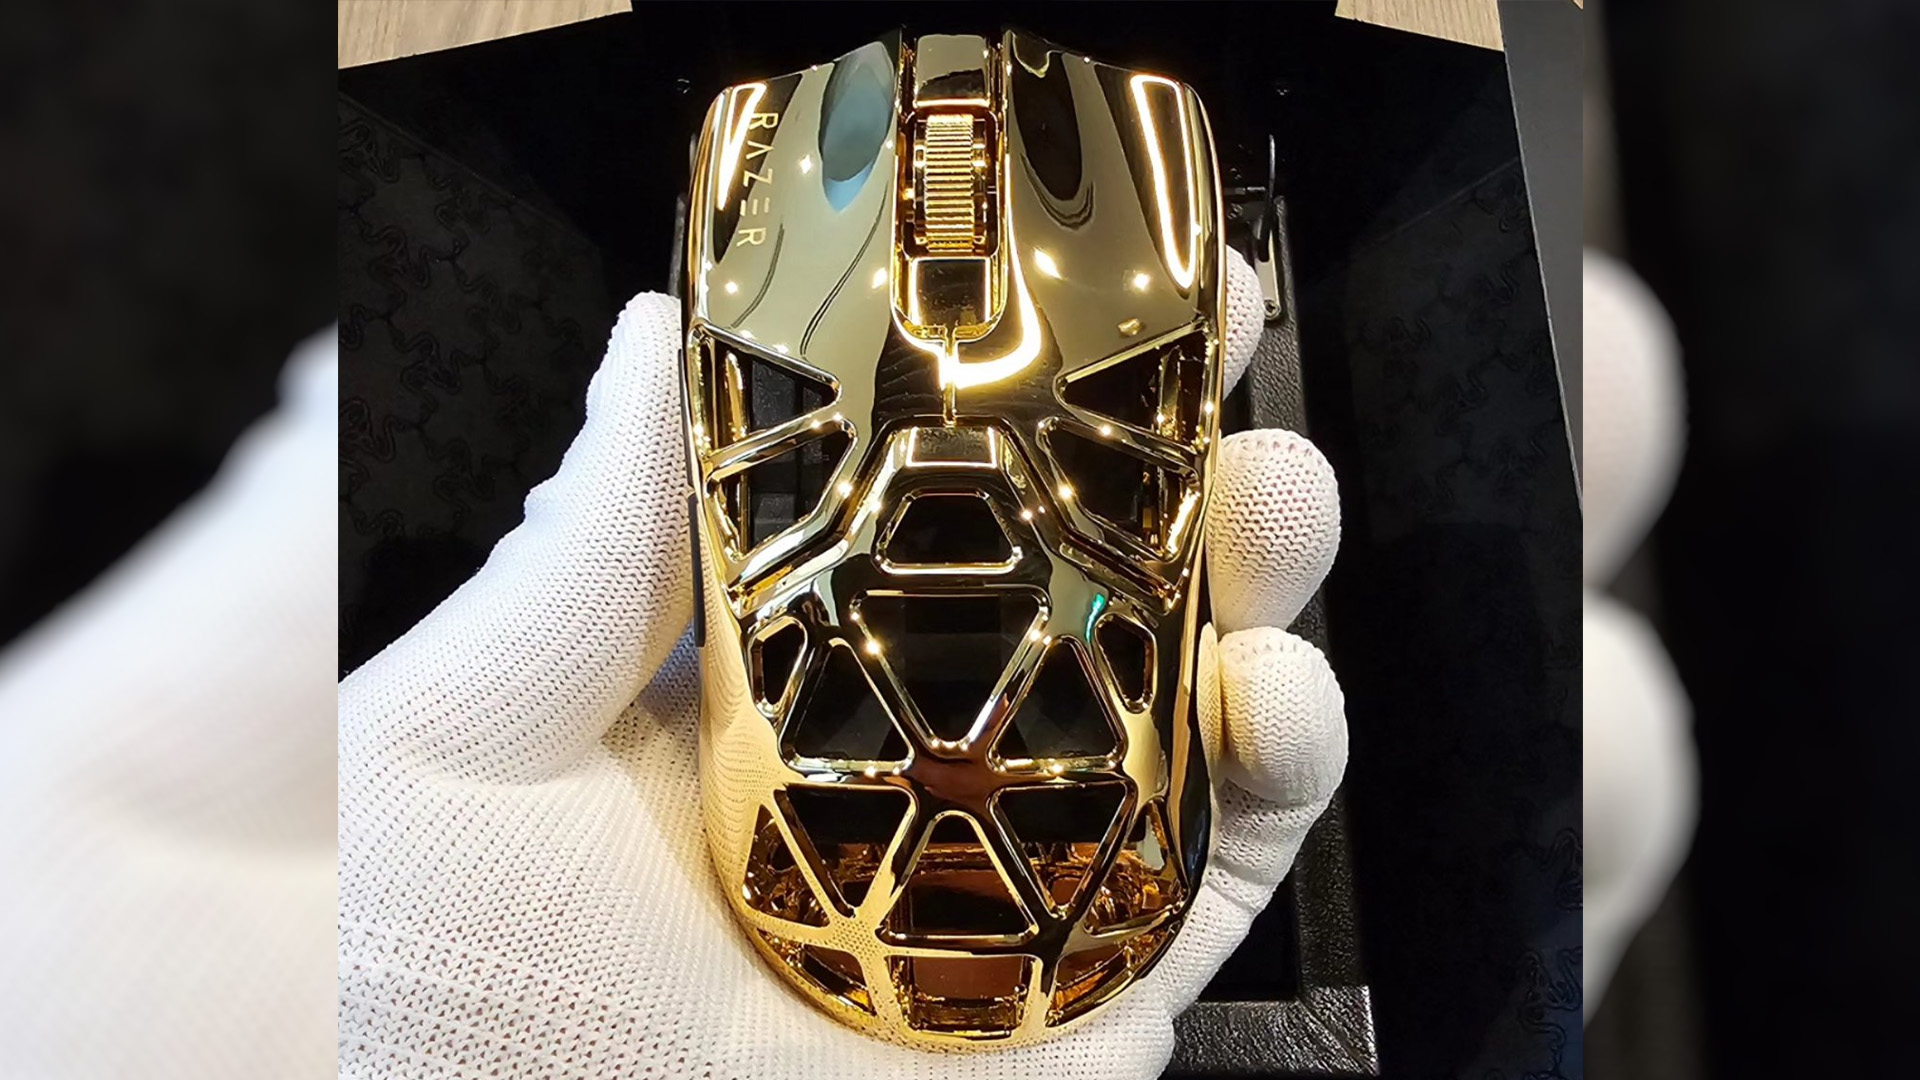 This 24 karat gold Razer gaming mouse is giving off major Scrooge McDuck  vibes